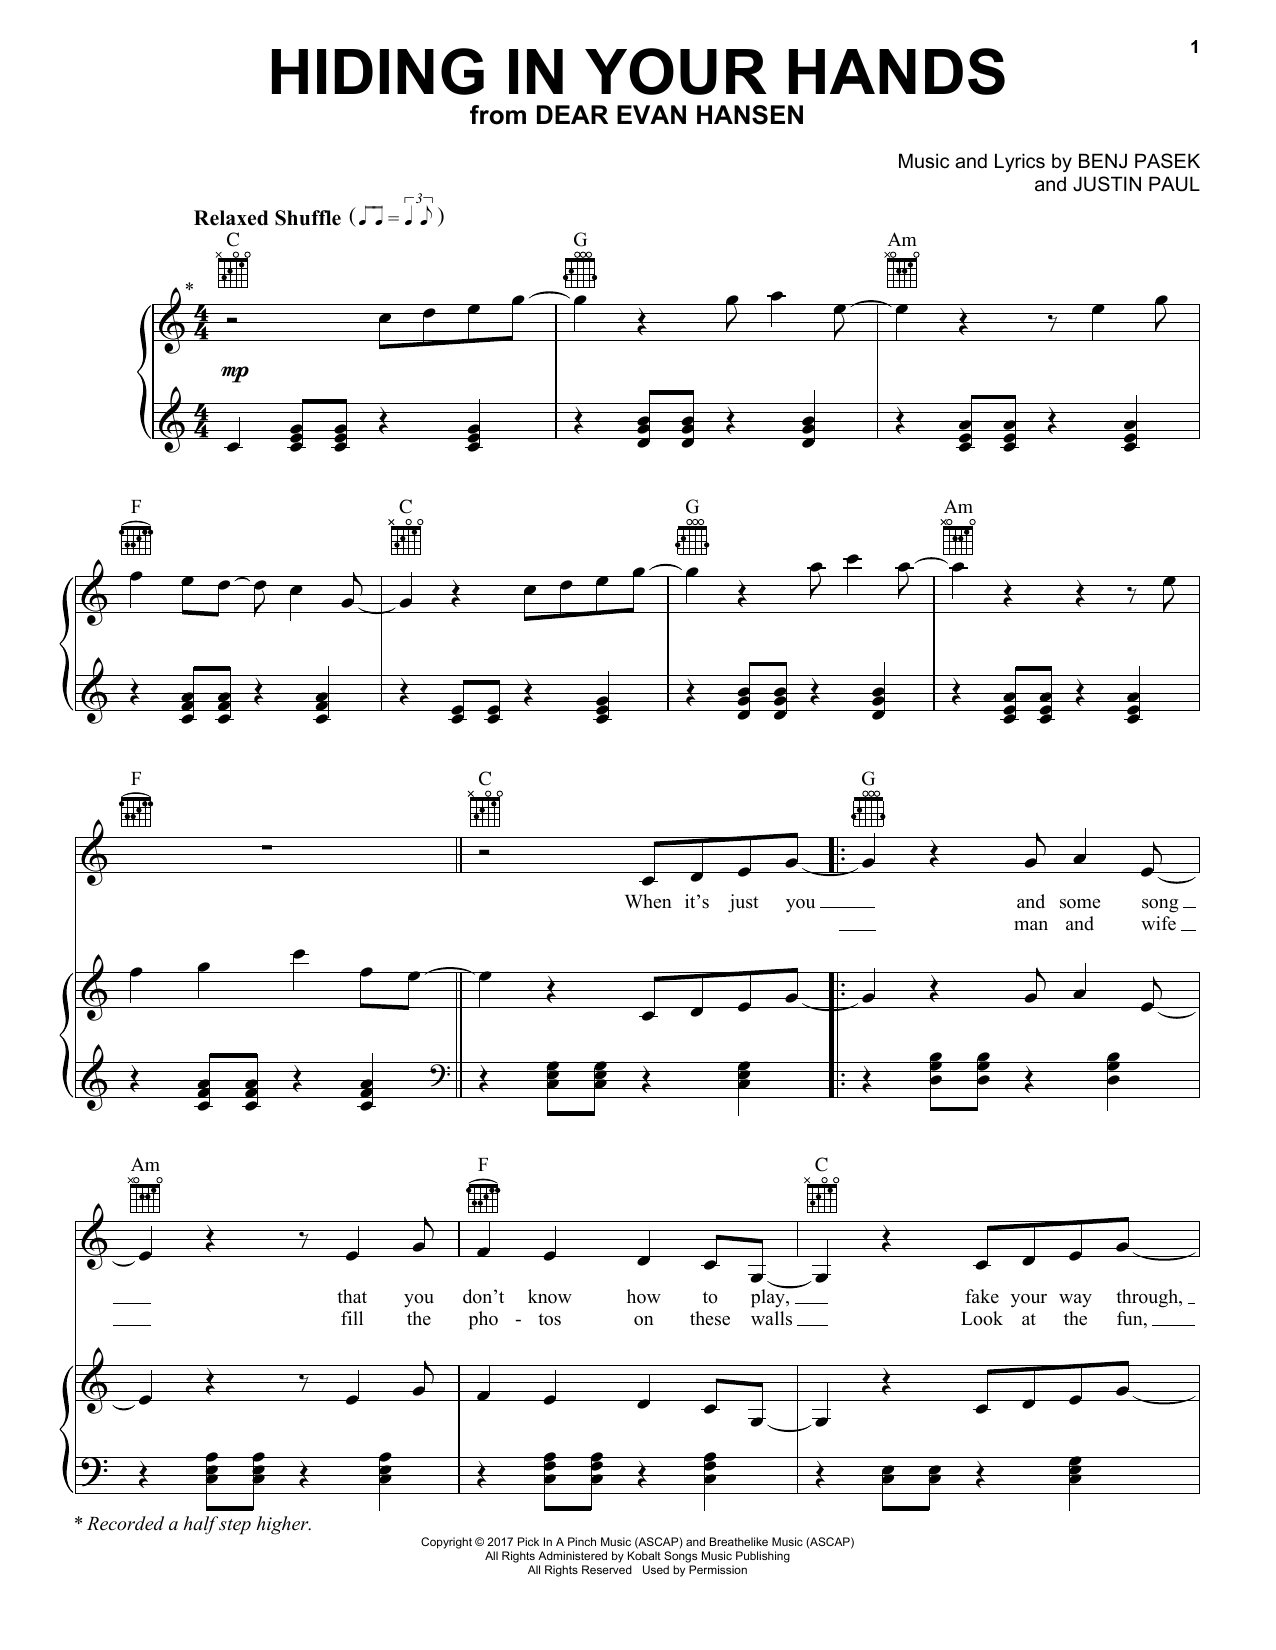 Pasek & Paul Hiding In Your Hands (from Dear Evan Hansen) sheet music preview music notes and score for Ukulele including 5 page(s)